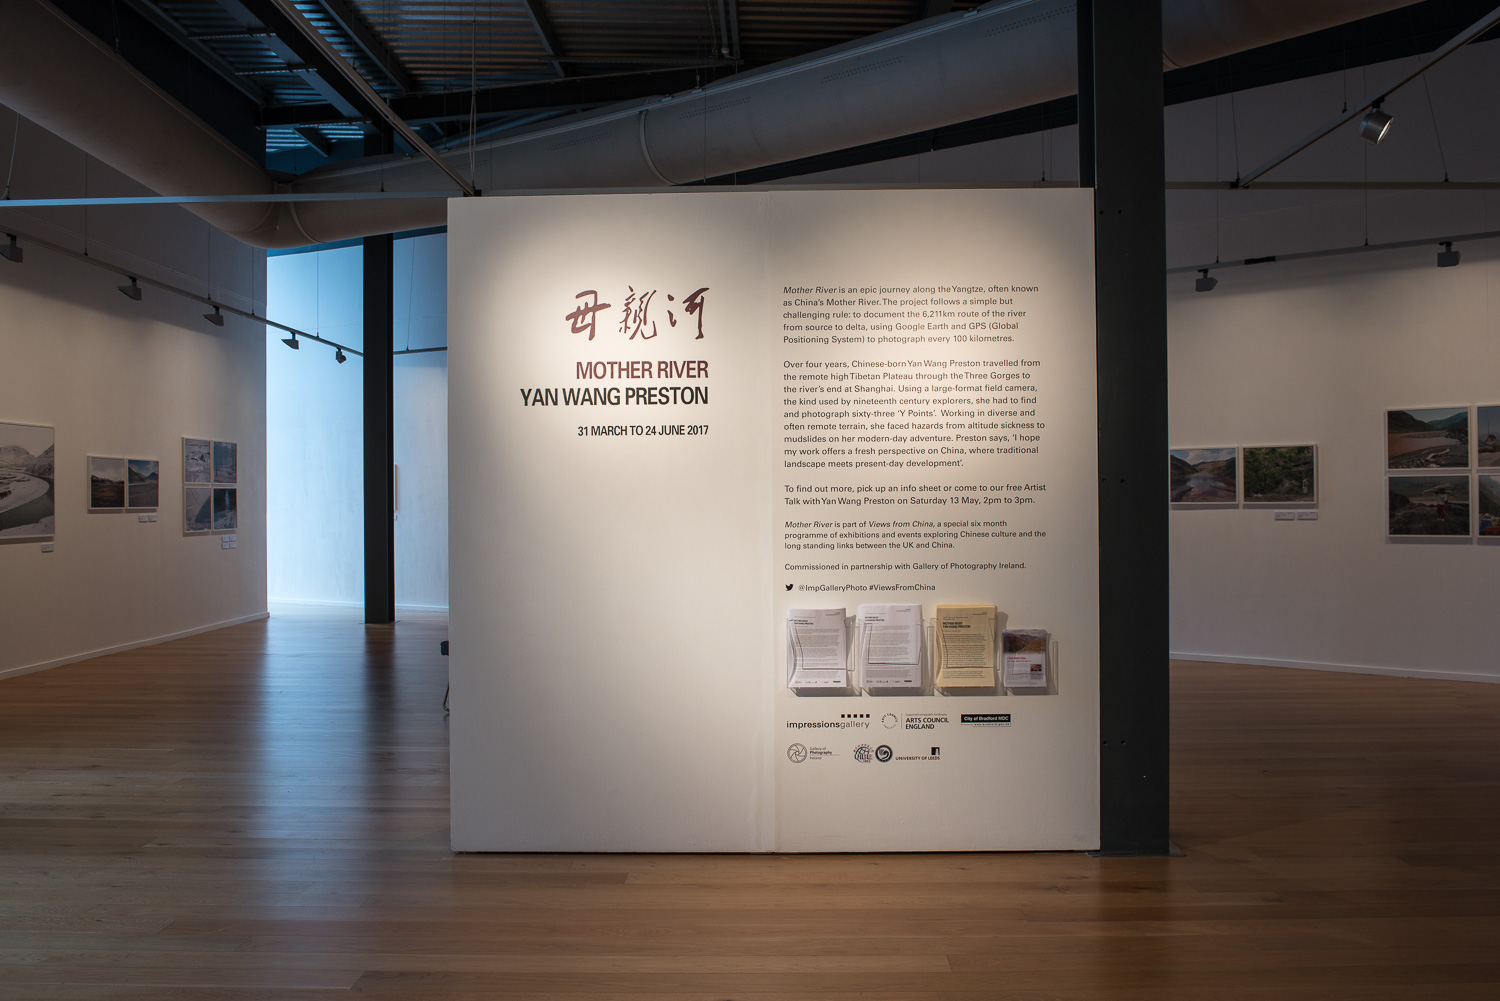 A wall in a gallery with exhibition text and resources.